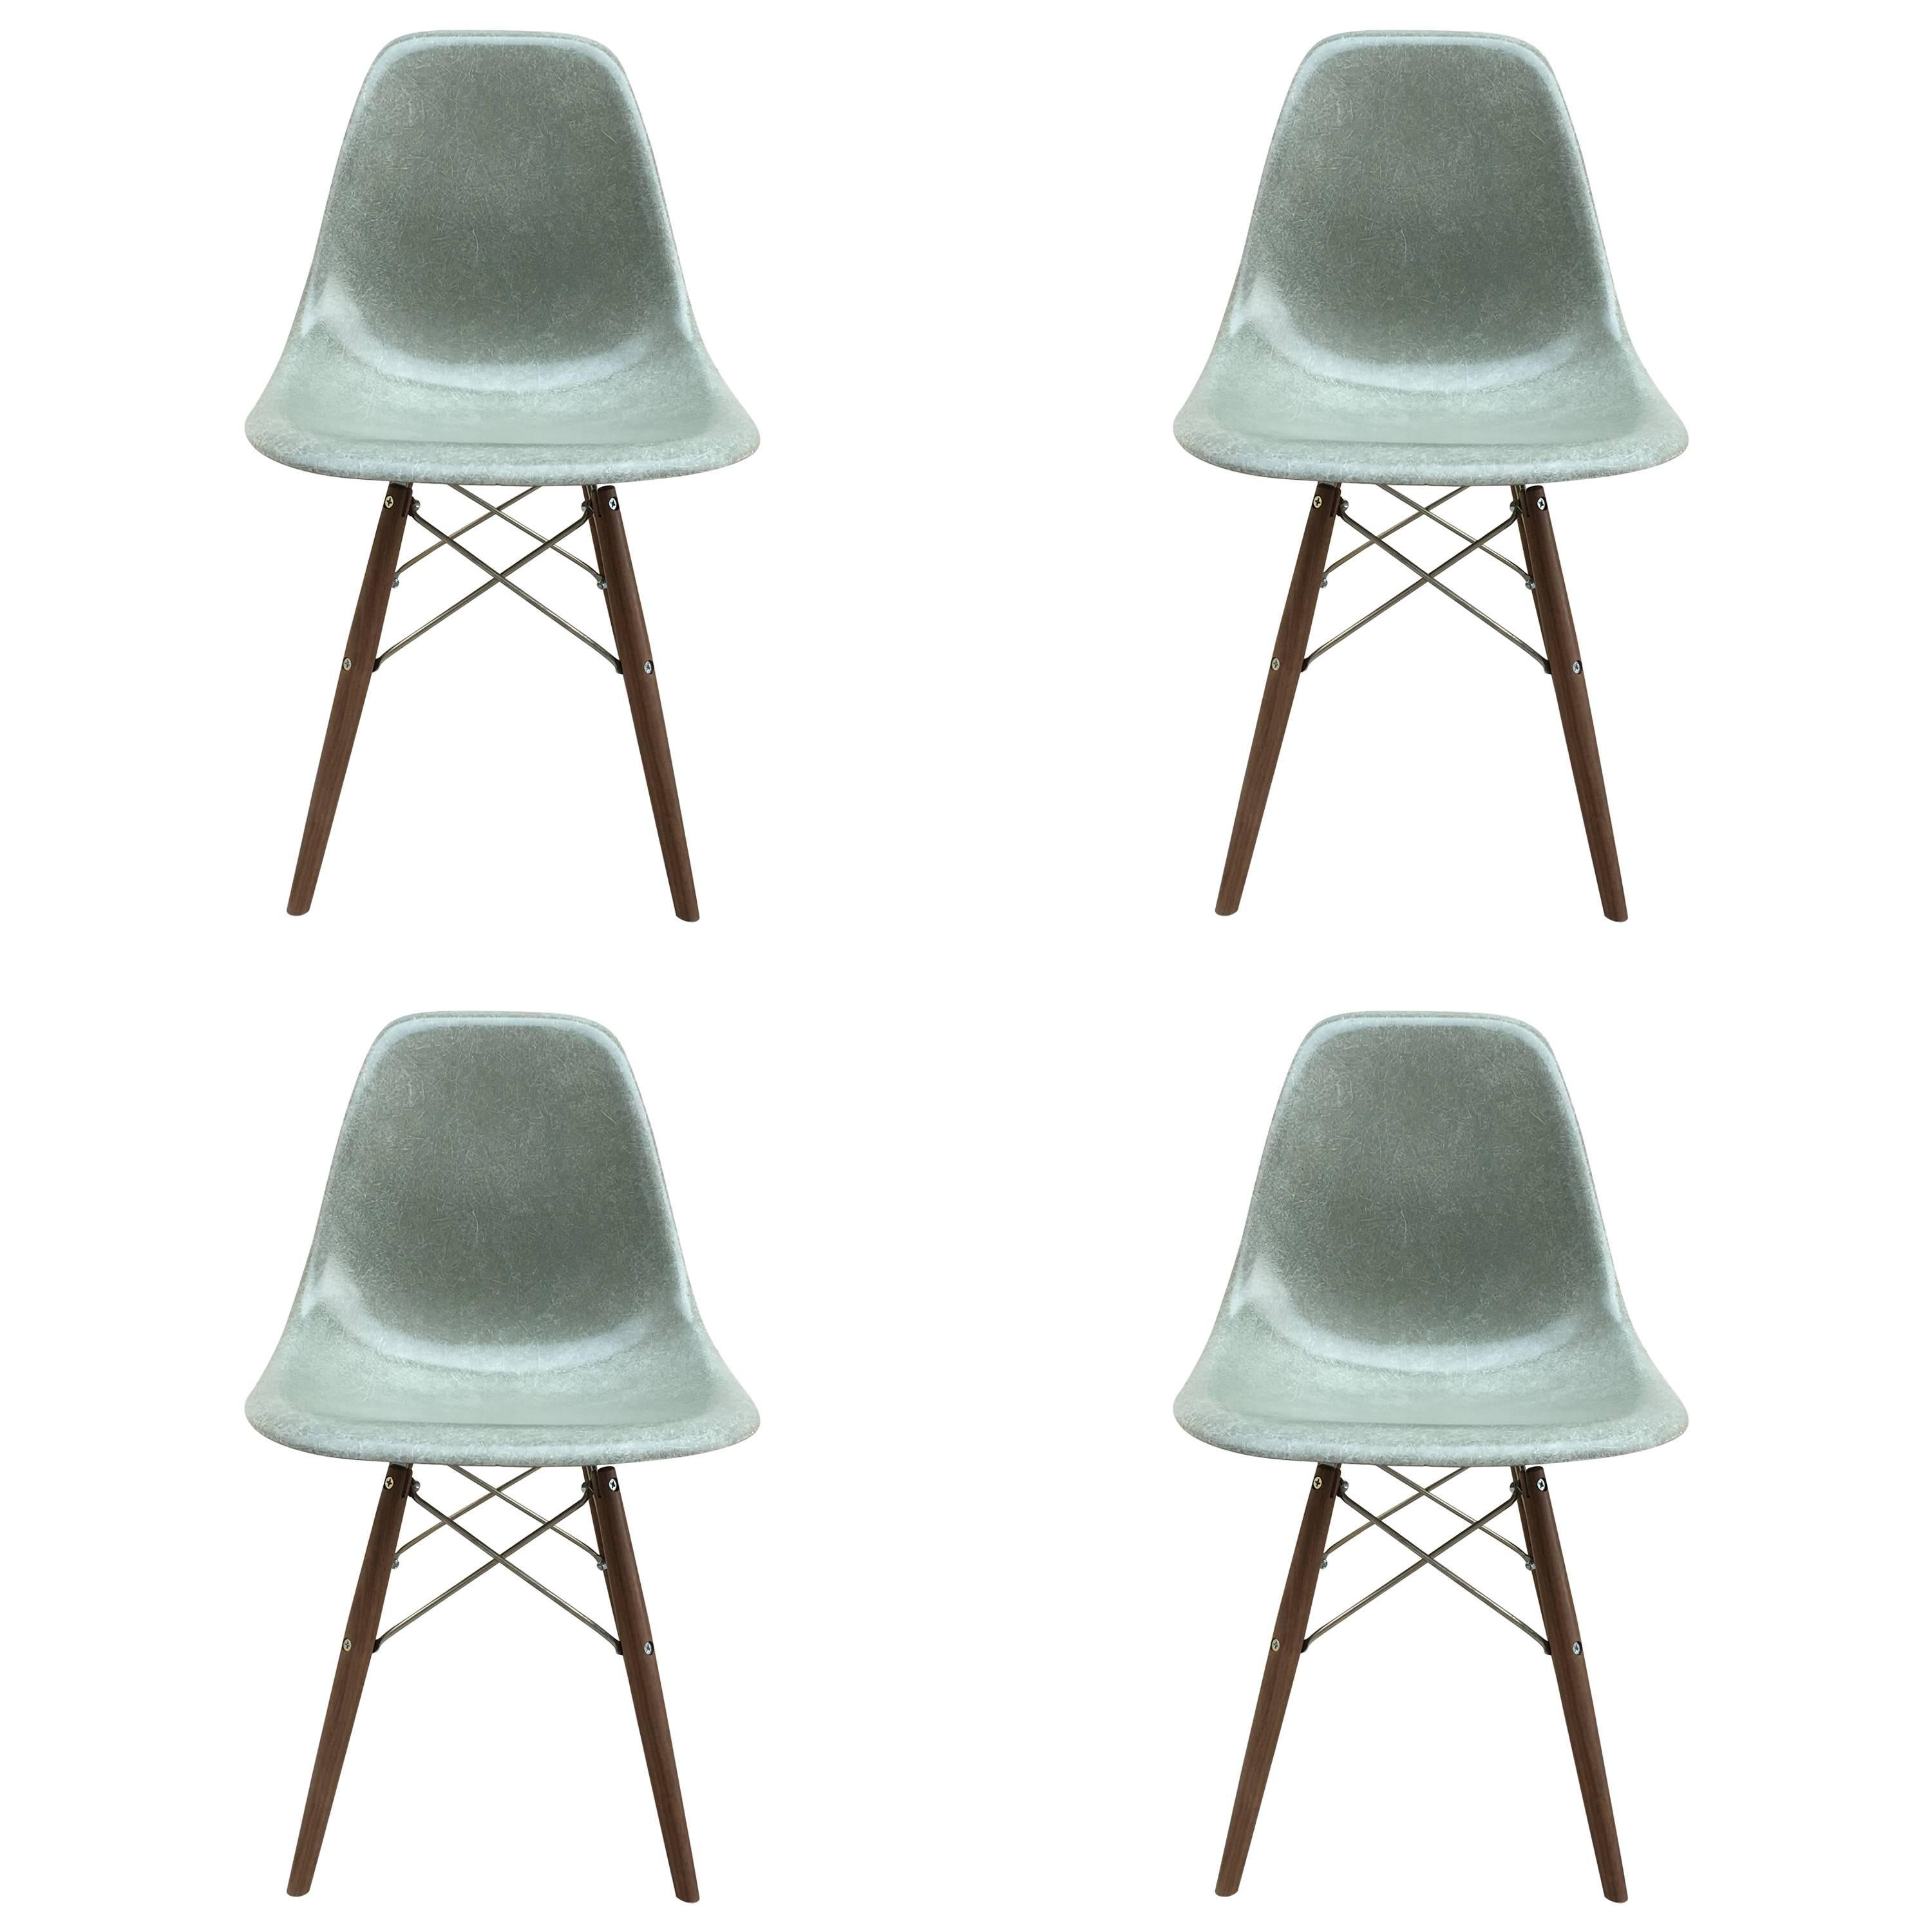 Four Herman Miller Eames Seafoam Dining Chairs